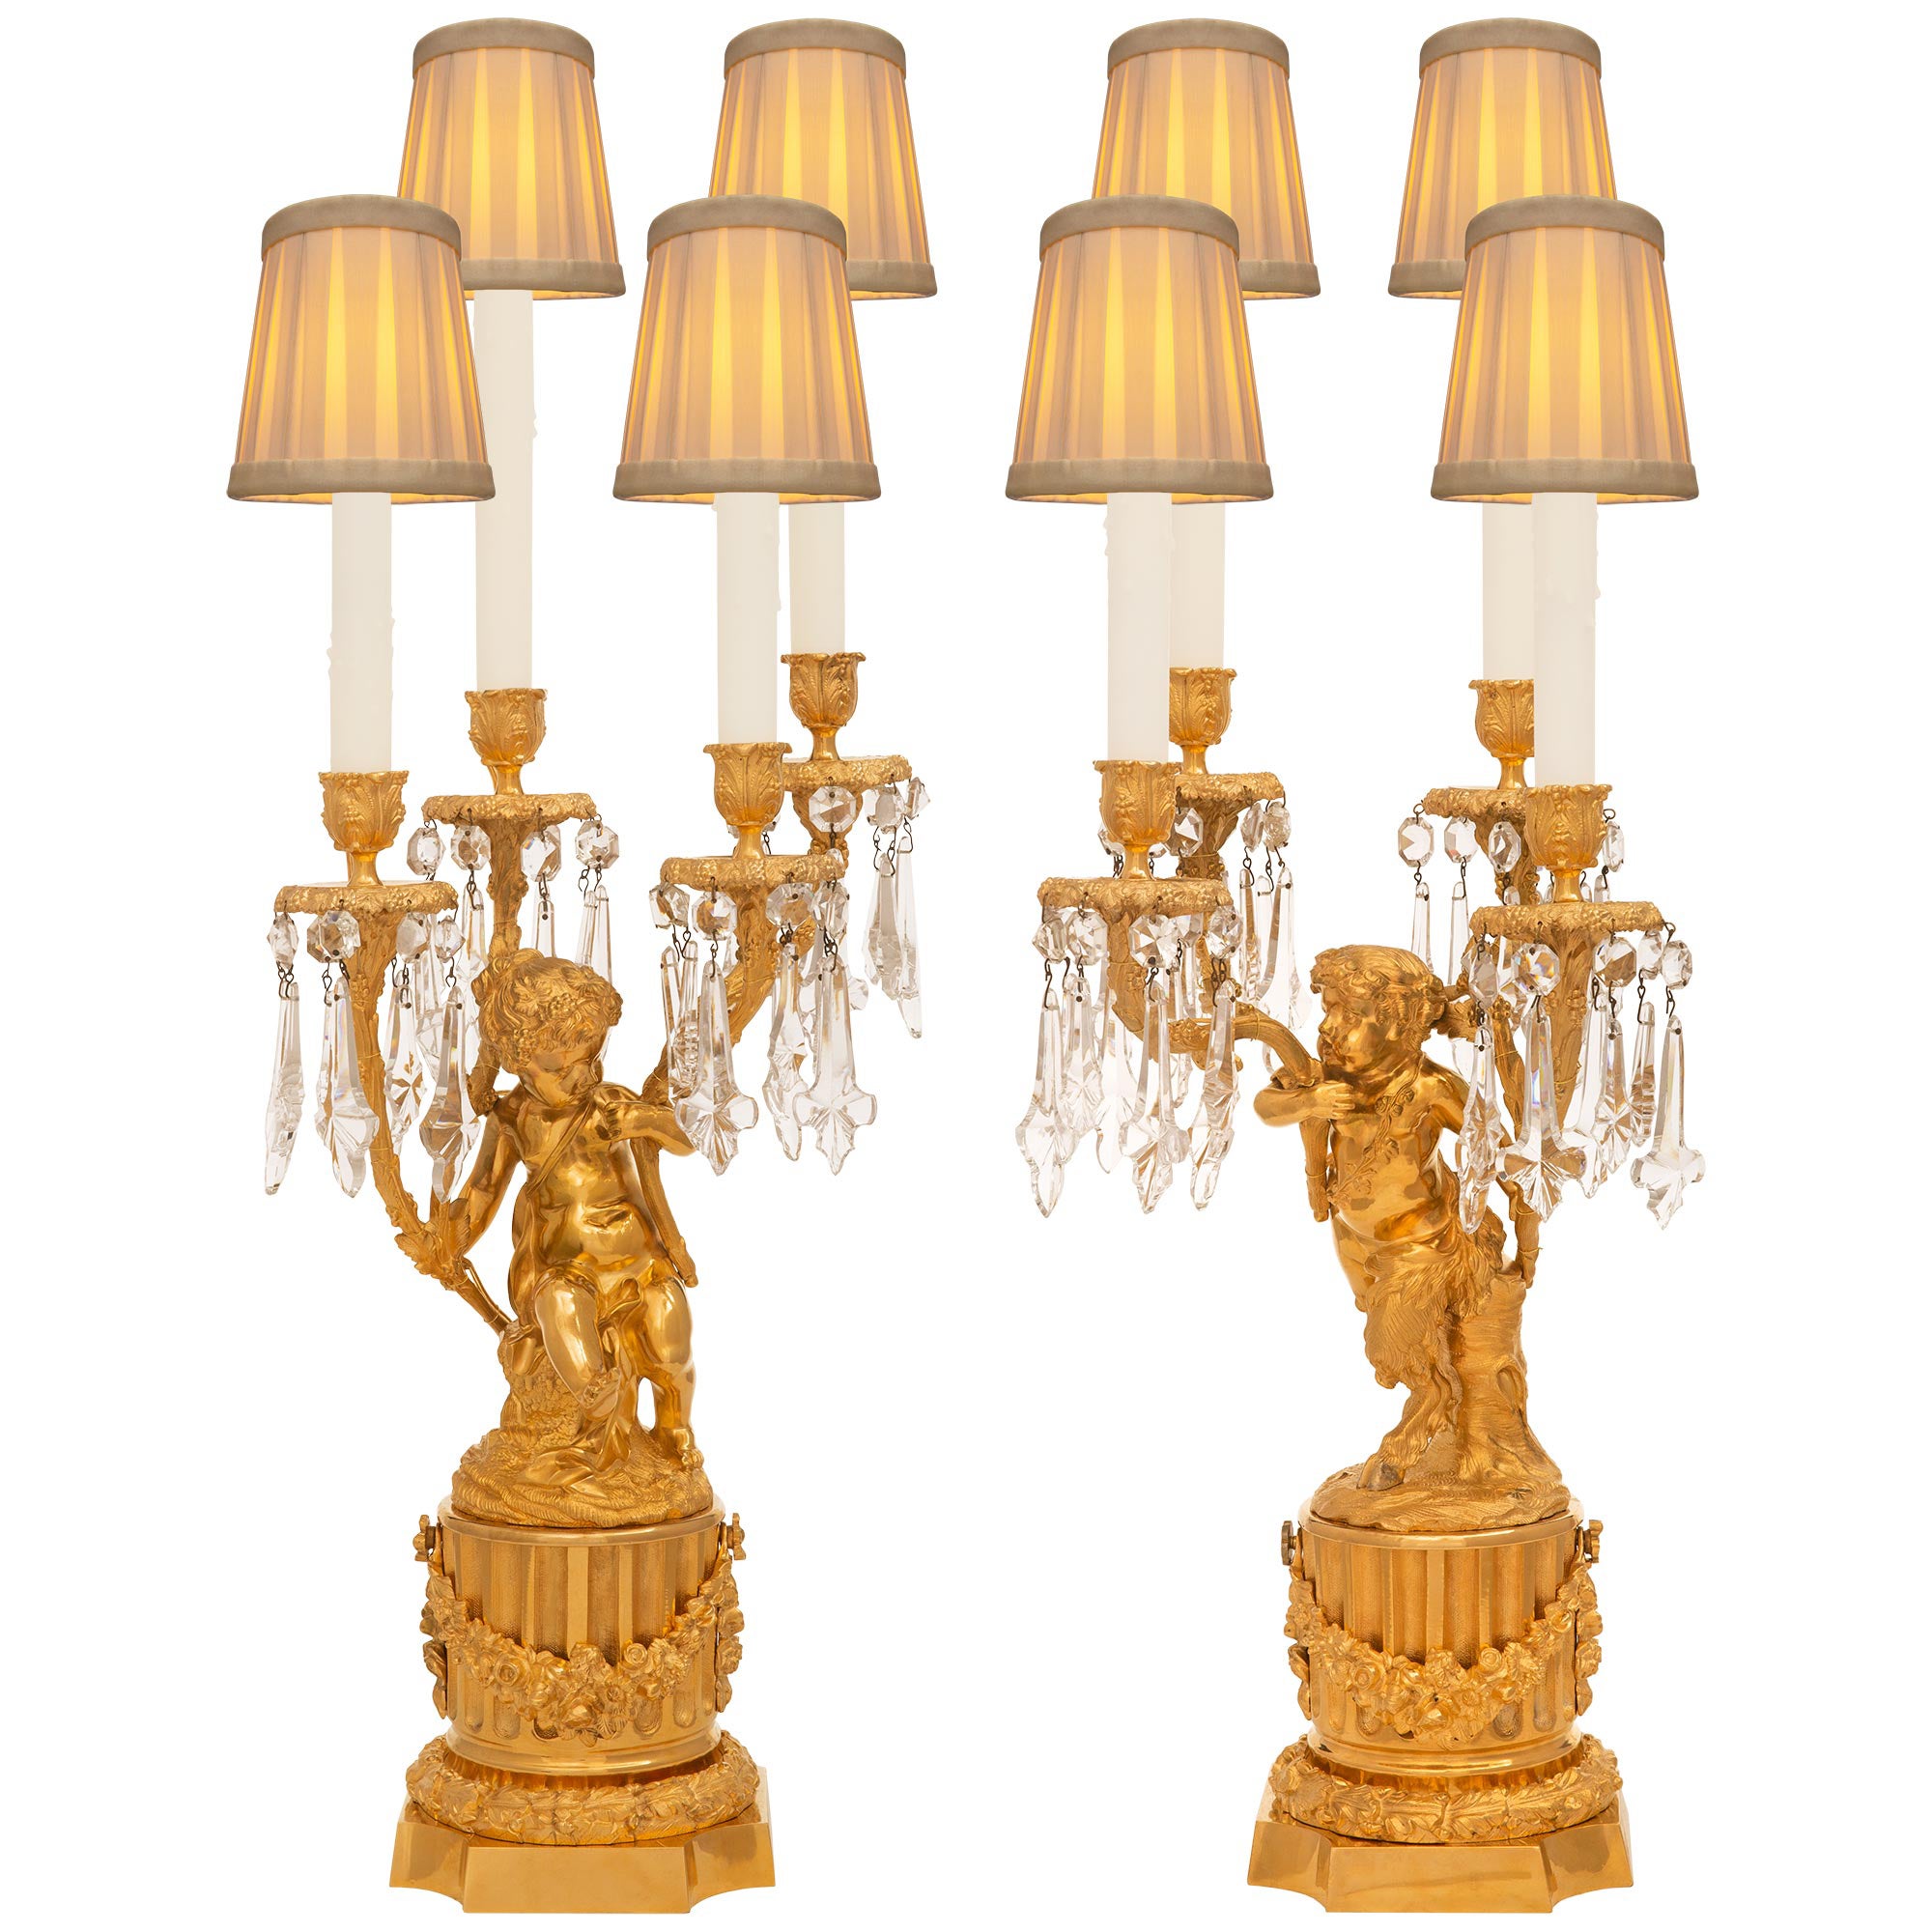 True Pair Of French 19th Century Louis XVI St. Ormolu & Crystal Candelabra Lamps For Sale